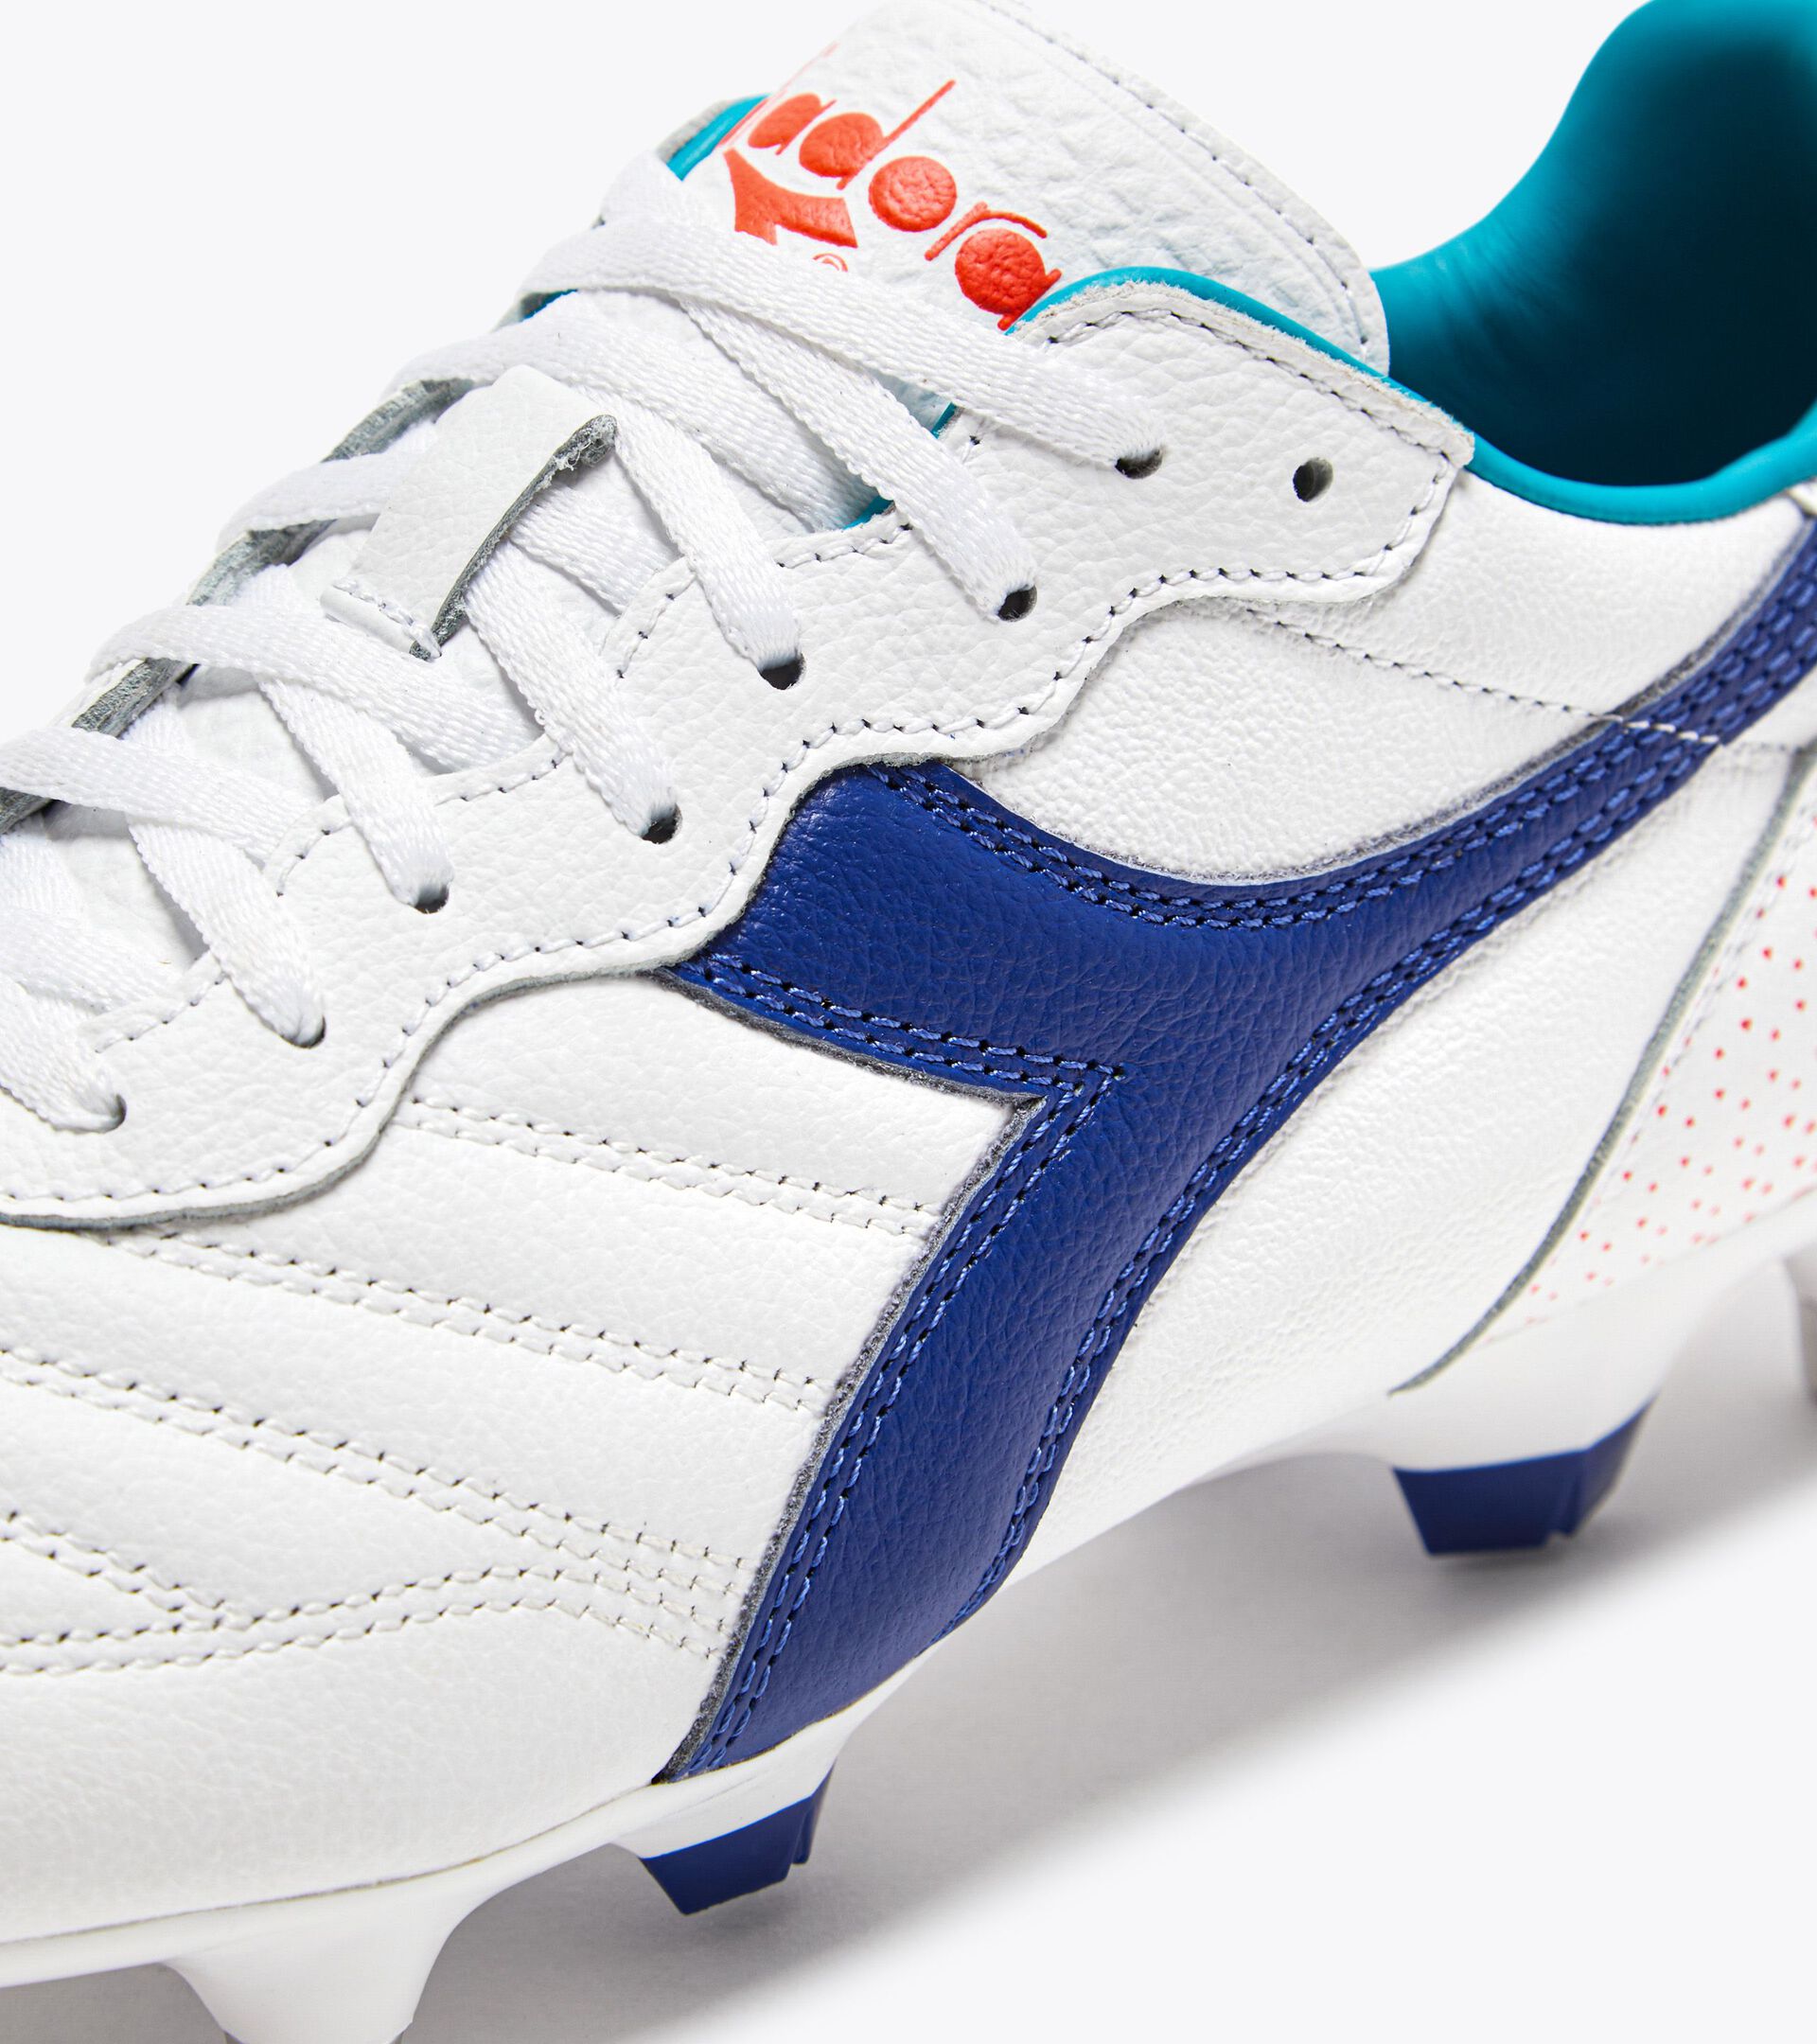 Calcio boots for soft and wet grounds BRASIL GR LT+ MPH WHITE/NAVY - Diadora